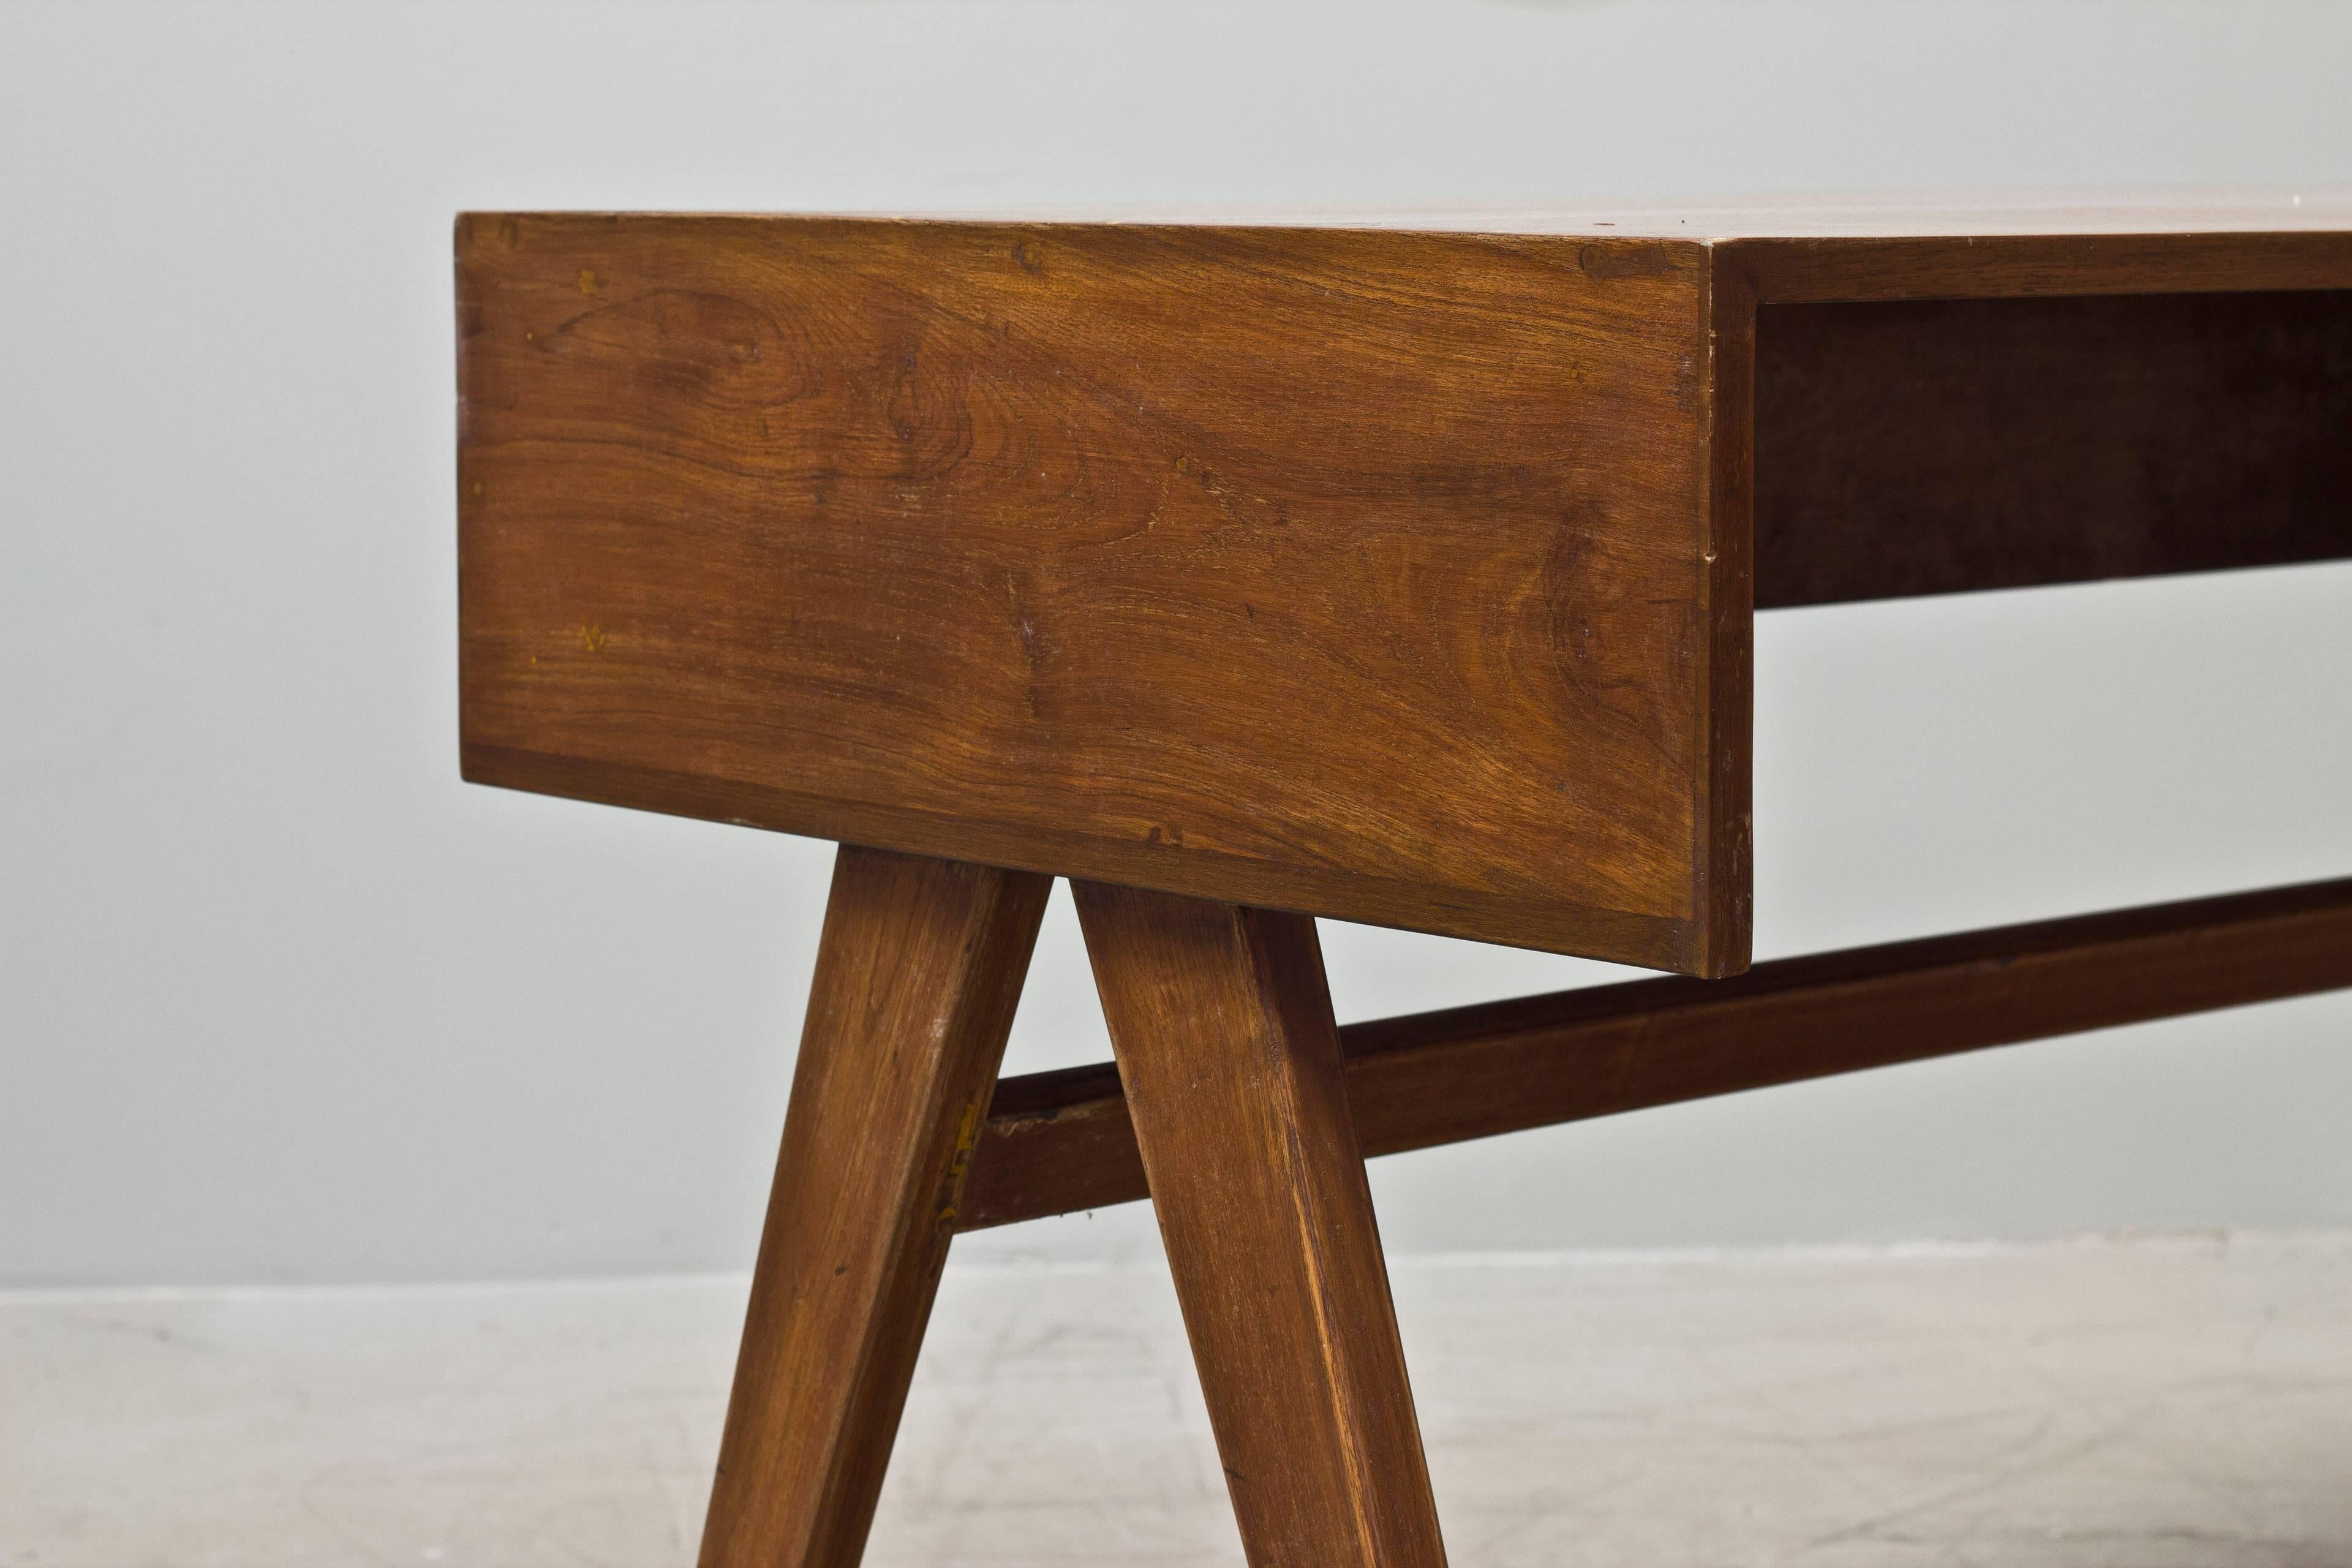 Architectural desk “PJ-BU-08-C” by Pierre Jeanneret, for the famous modernist capital city of Chandigarh, India designed by Le Corbusier, Jeanneret, and their team.

Year: 1960s.
Country: India.
Condition: Vintage condition.

Dimensions:

H